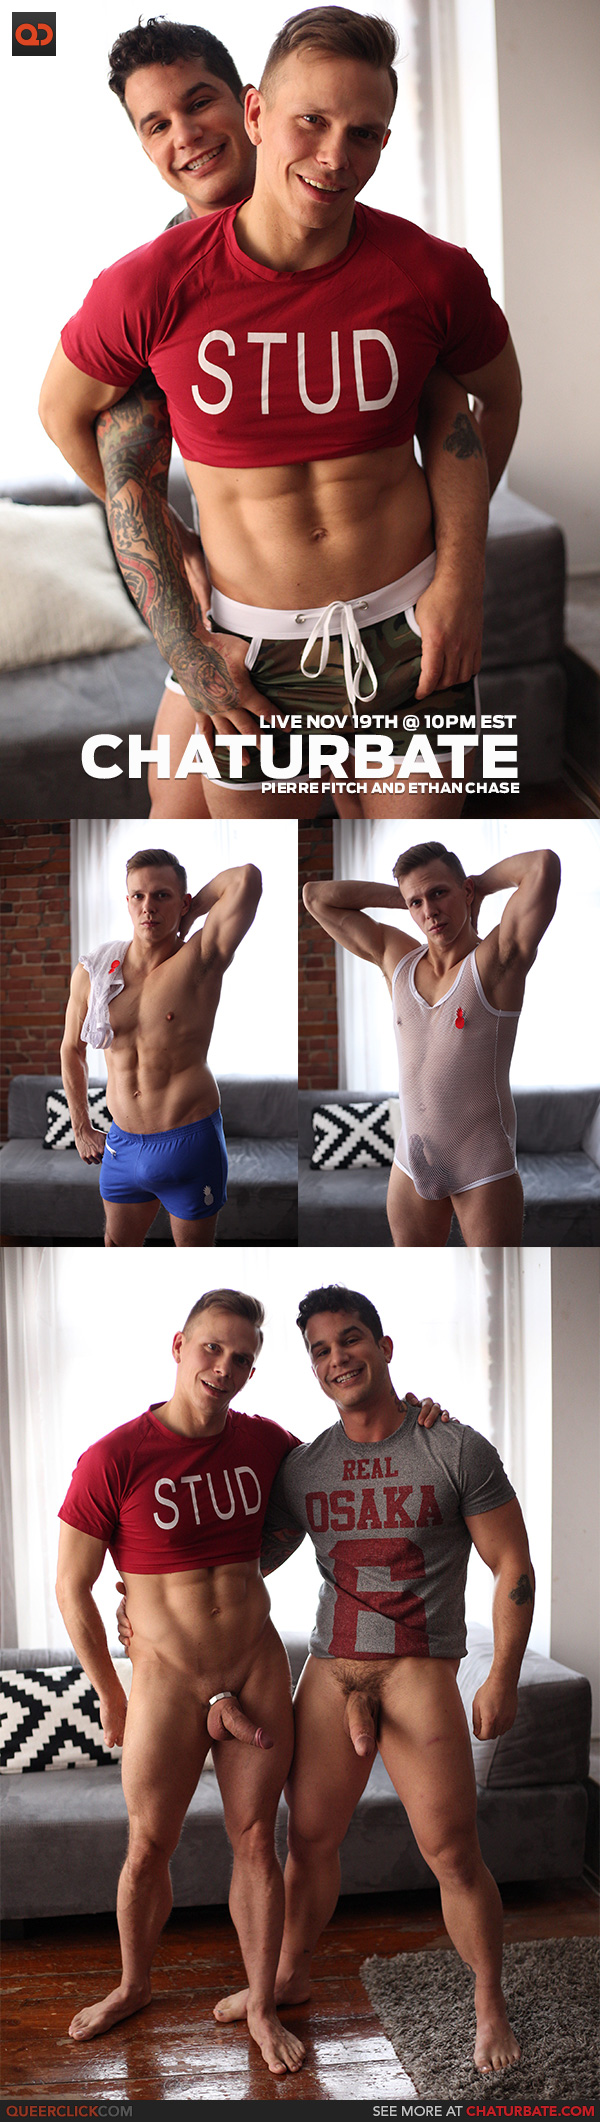 Pierre Fitch Ethan Chase